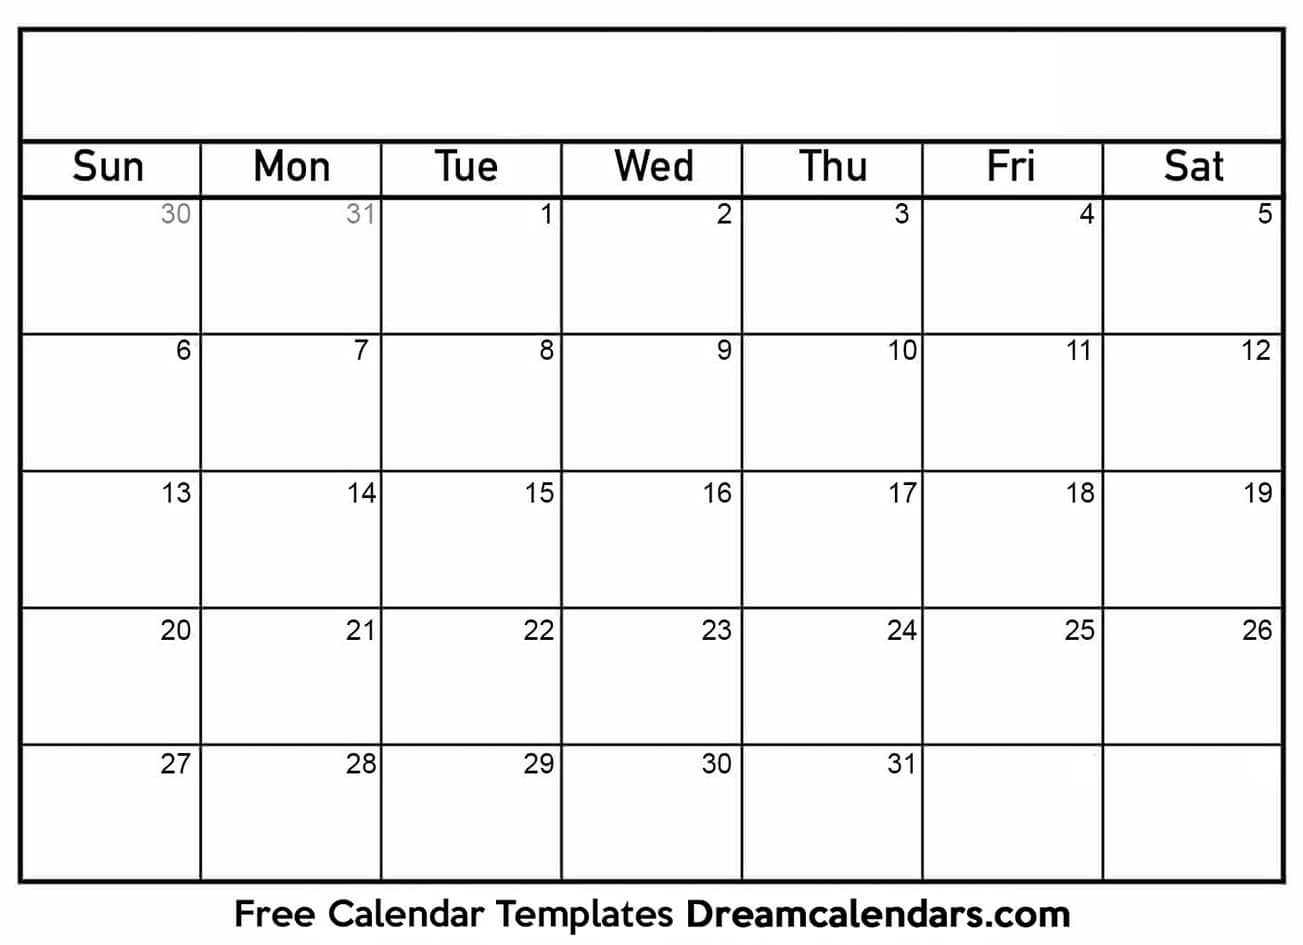 Printable Blank Calendar 2020 | Dream Calendars pertaining to Print Free Calendars Without Downloading